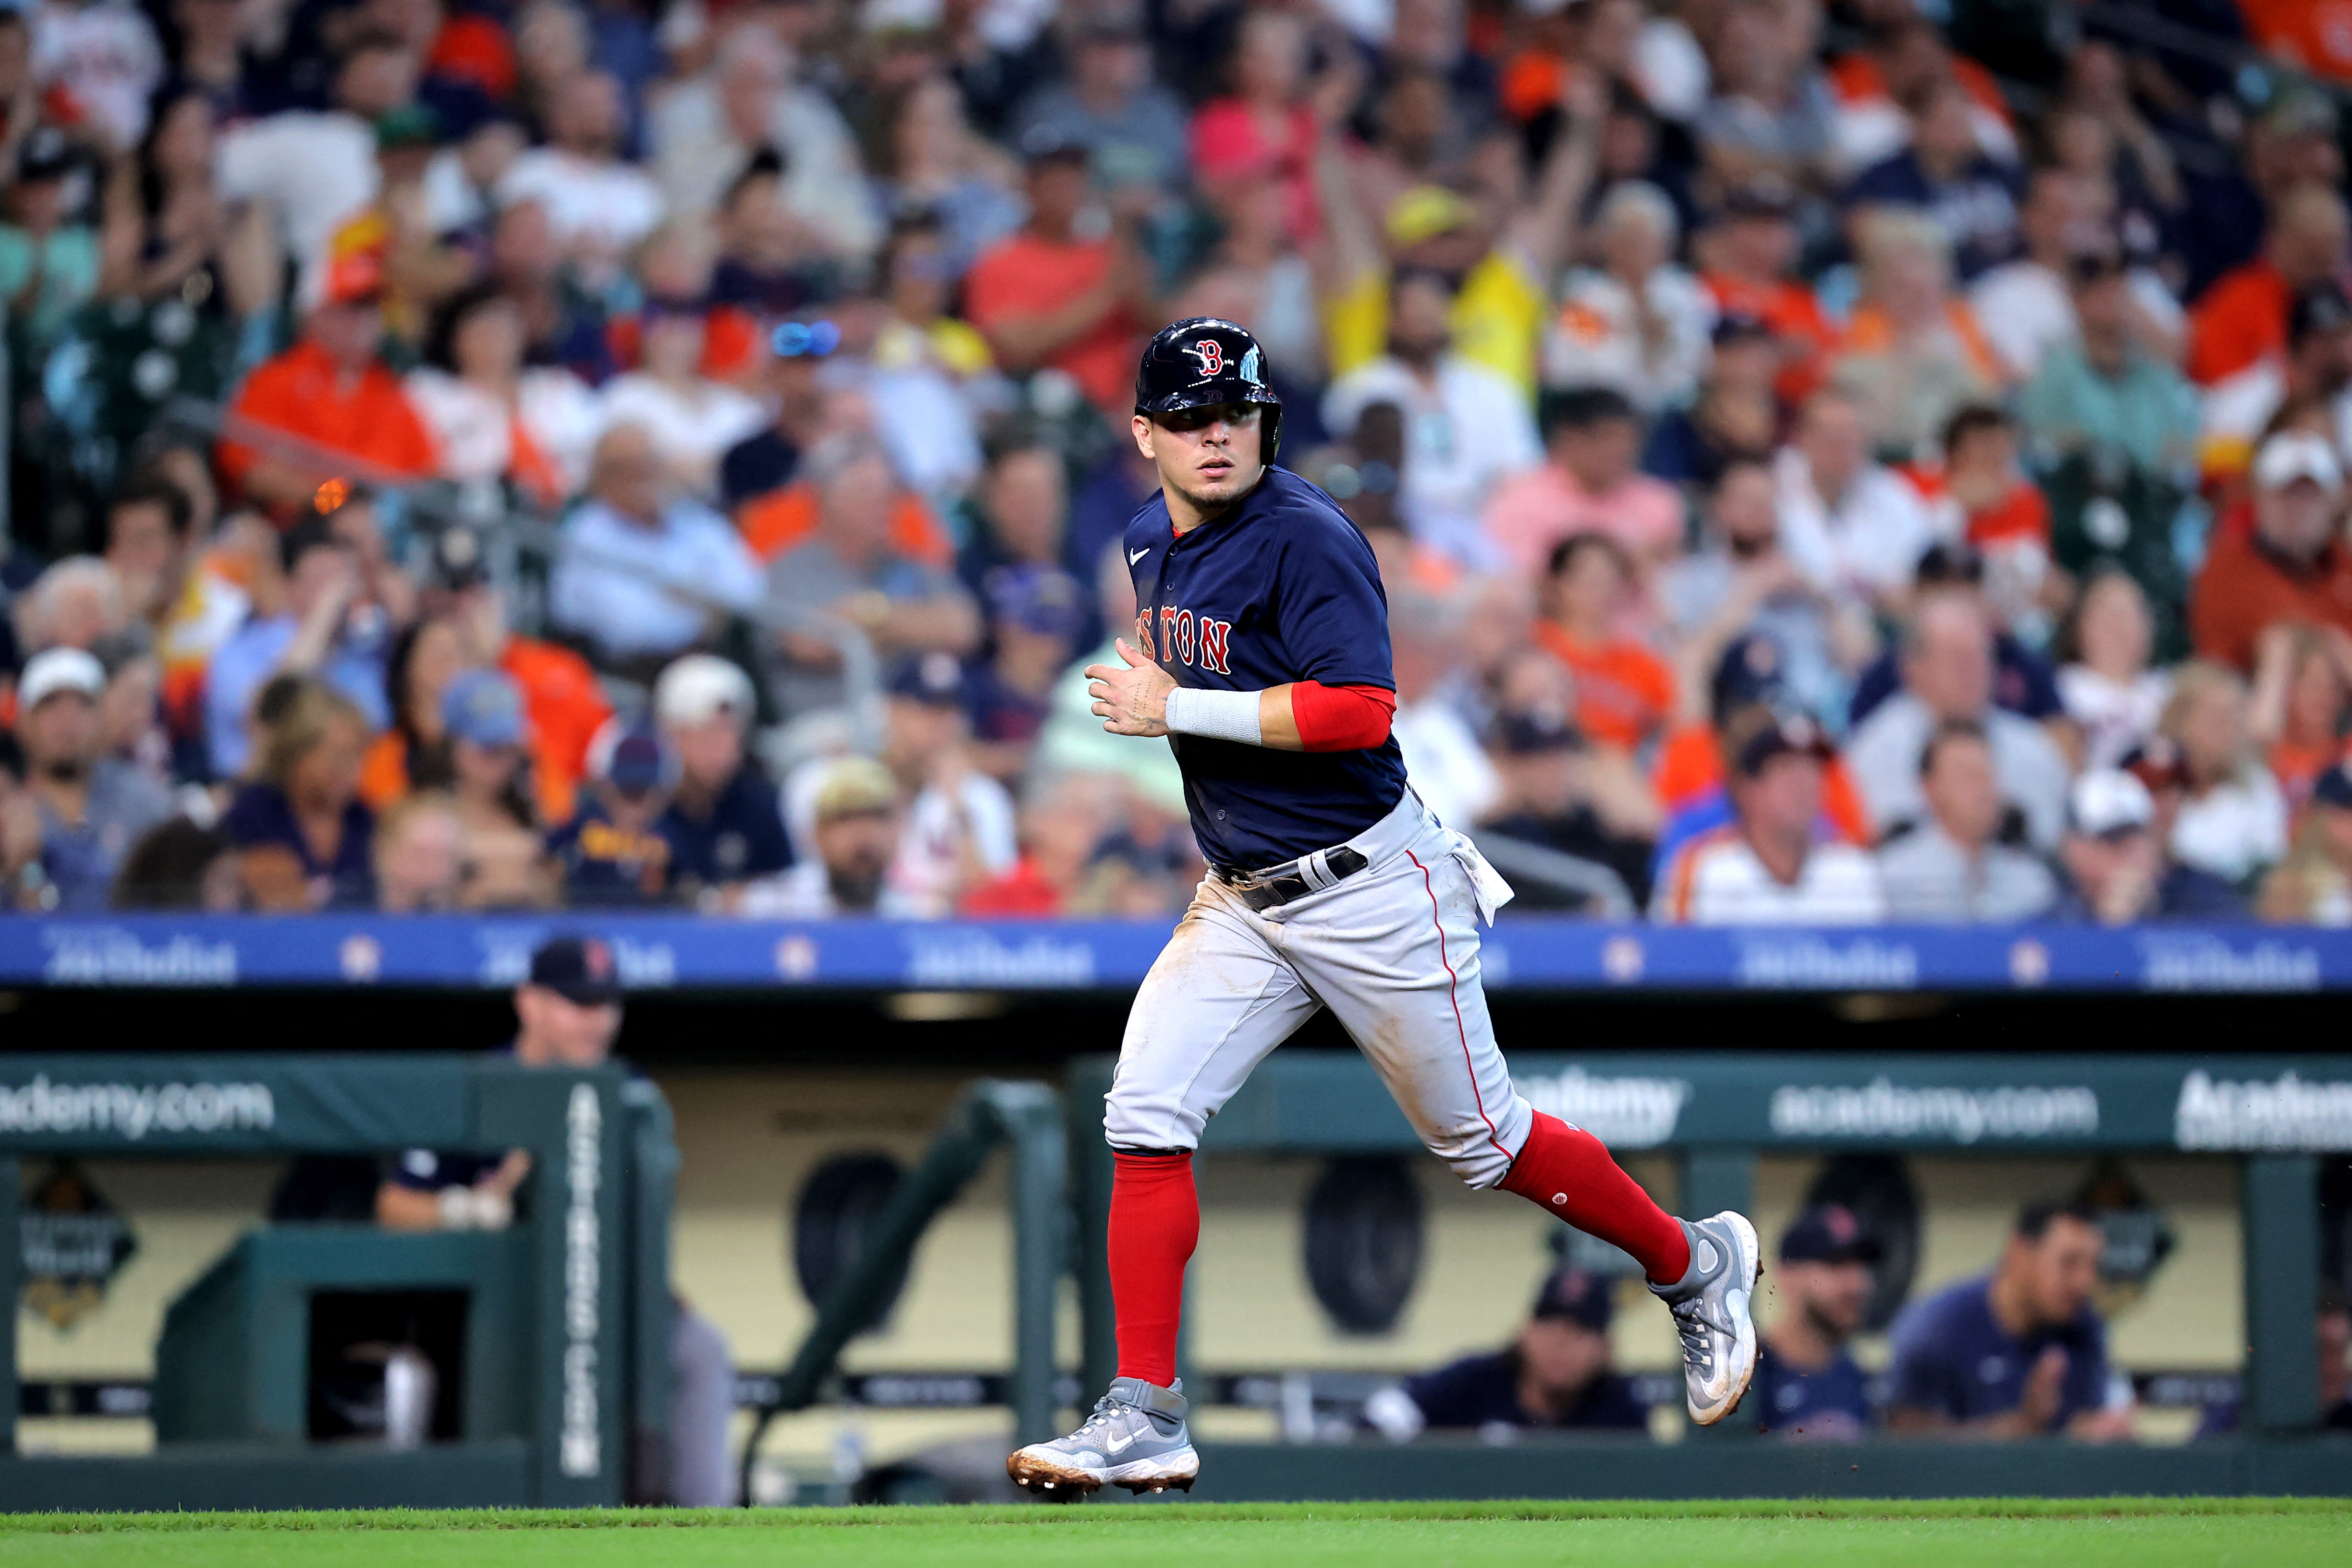 Red Sox bash 24 hits, take down Astros 17-1